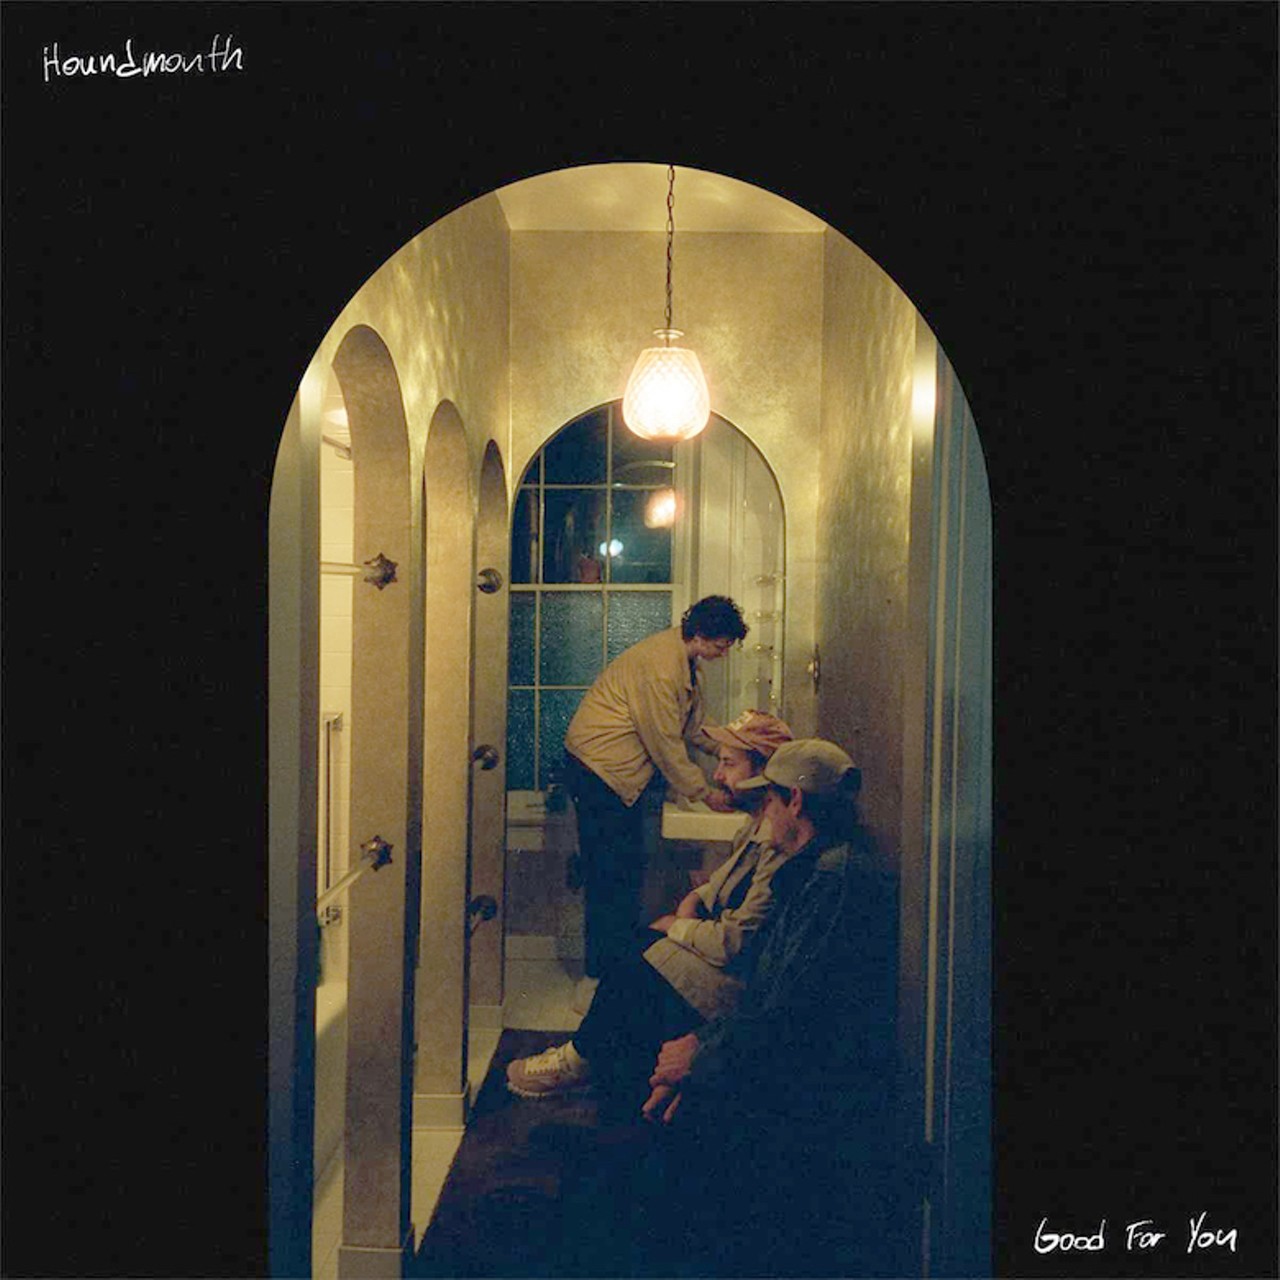 Houndmouth
McKenzie
&#147;McKenzie&#148; is the second single off of Houndmouth&#146;s latest album Good For You, which is their first on Dualtone Records. The new record is a return to Houndmouth&#146;s signature Americana sound after the electronic experimentation of the band&#146;s previous release, 2018&#146;s Golden Age. For me, this song of unrequited love is the standout track on Good For You. &#147;McKenzie&#148; is a showcase for everything Houndmouth does well. The song has a lazy, hypnotic groove that pairs well with singer Matt Myers&#146; subdued vocals. Myers has a knack for delivering simple lines that hint at deeper emotions. As when he sings, &#147;McKenzie / I only see you when it&#146;s dark out / And these streets grow faces / I met you when you was a waitress / I can&#146;t remember what I said / But I was long-winded.&#148; I immediately liked &#147;McKenzie&#148; when I heard the band perform it on CBS Saturday Morning some months ago, and it stayed with me. When the band played it at their show at Old Forester&#146;s Paristown Hall back in November, it drew a big shout of approval from the crowd. I knew then that I wasn&#146;t the only one who had this song stuck in their head. &#151; Michael L. Jones
Listen on Bandcamp